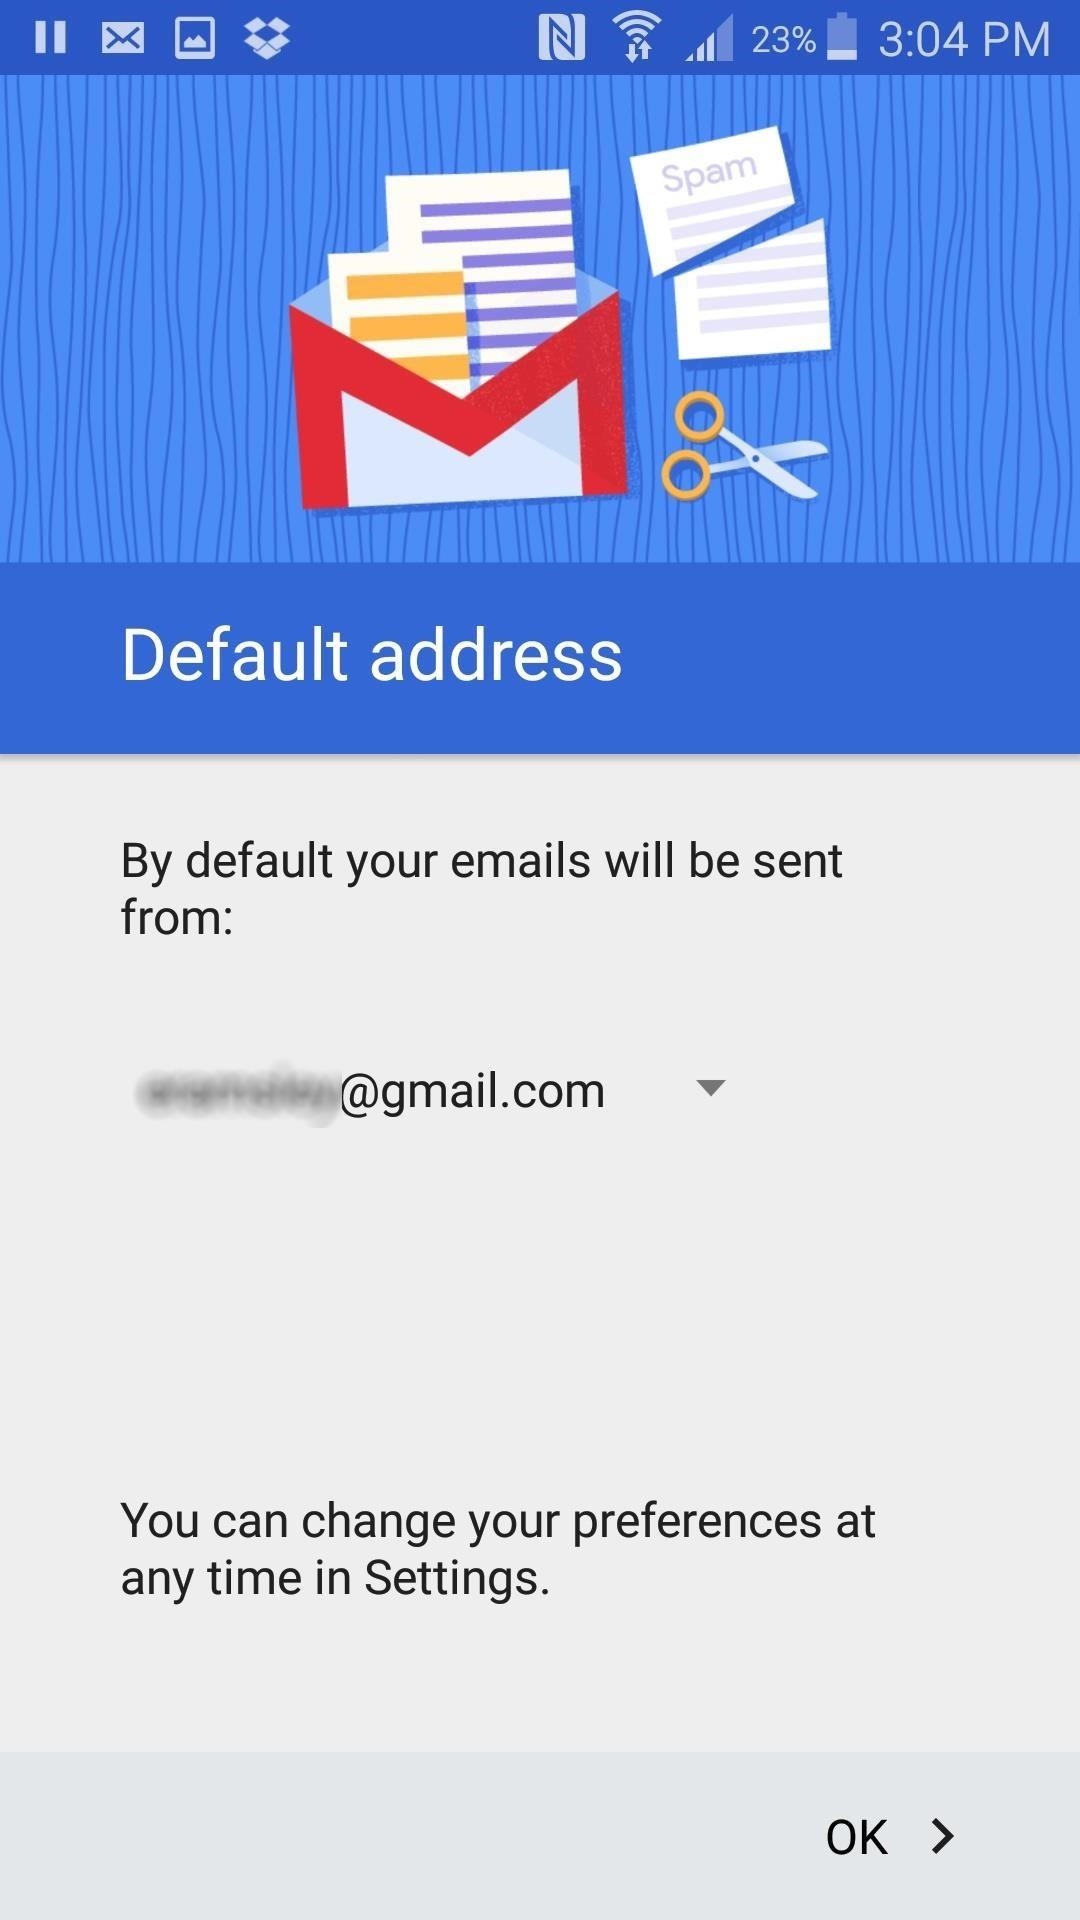 Gmail Introduces Gmailify, a Better Way to Manage Your Non-Gmail Email Accounts